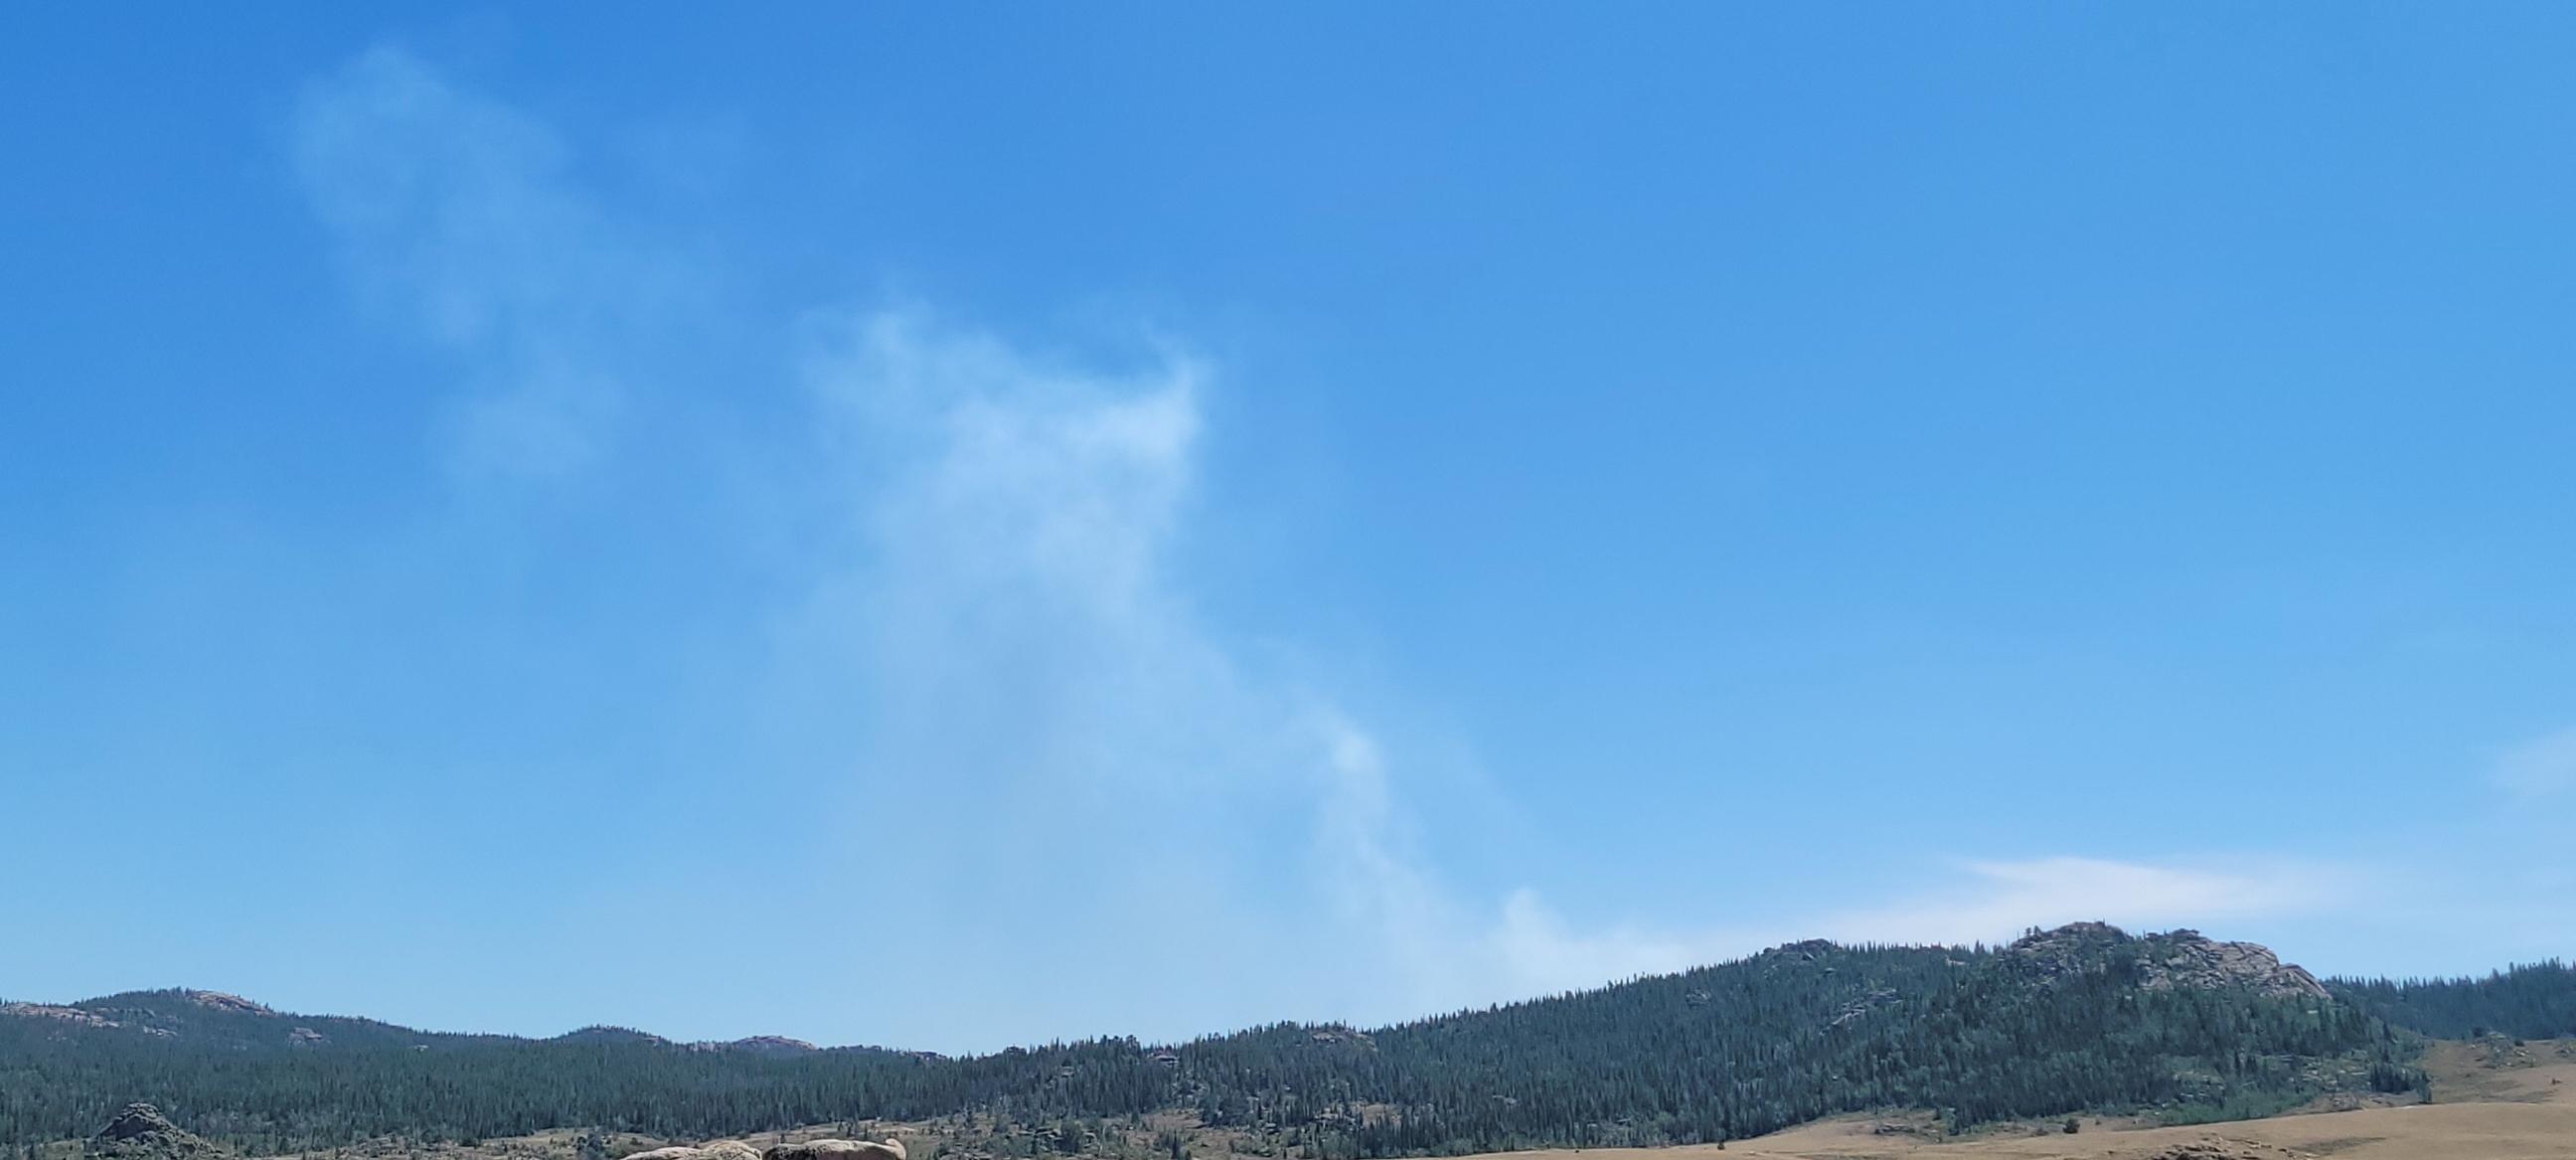 Incident Photo for the Sugarloaf Fire